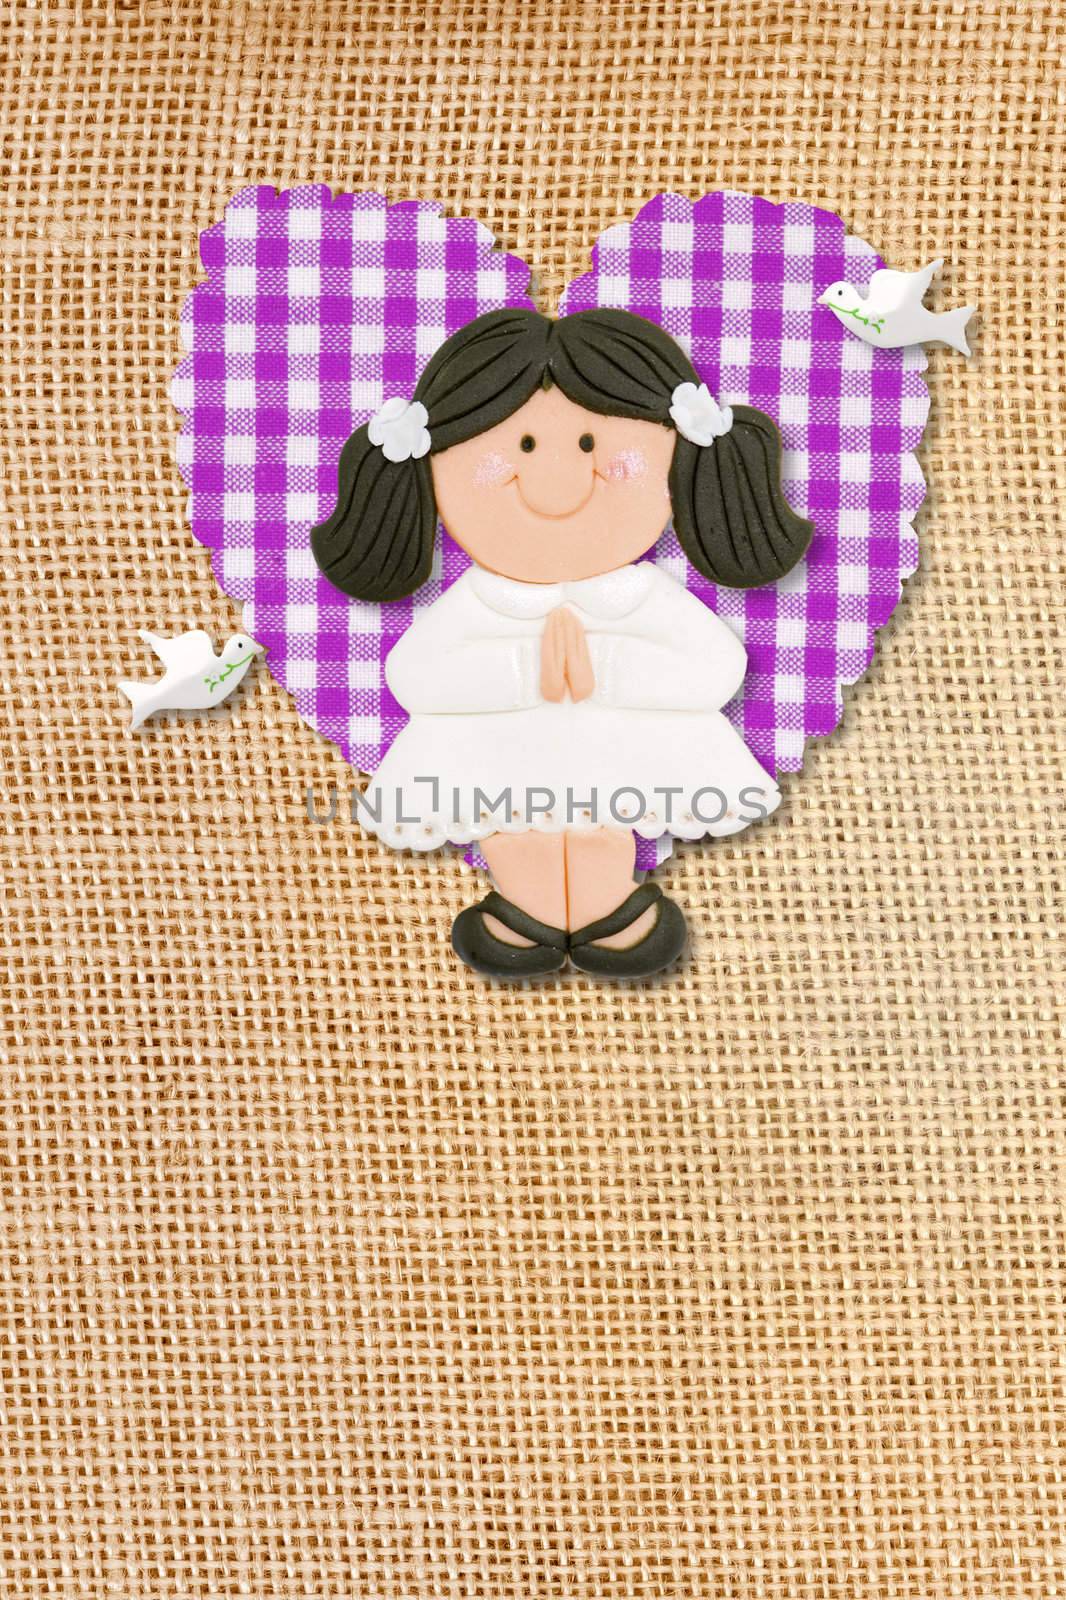 First Holy Communion Invitation Card, rustic style, funny brunette girl by Carche